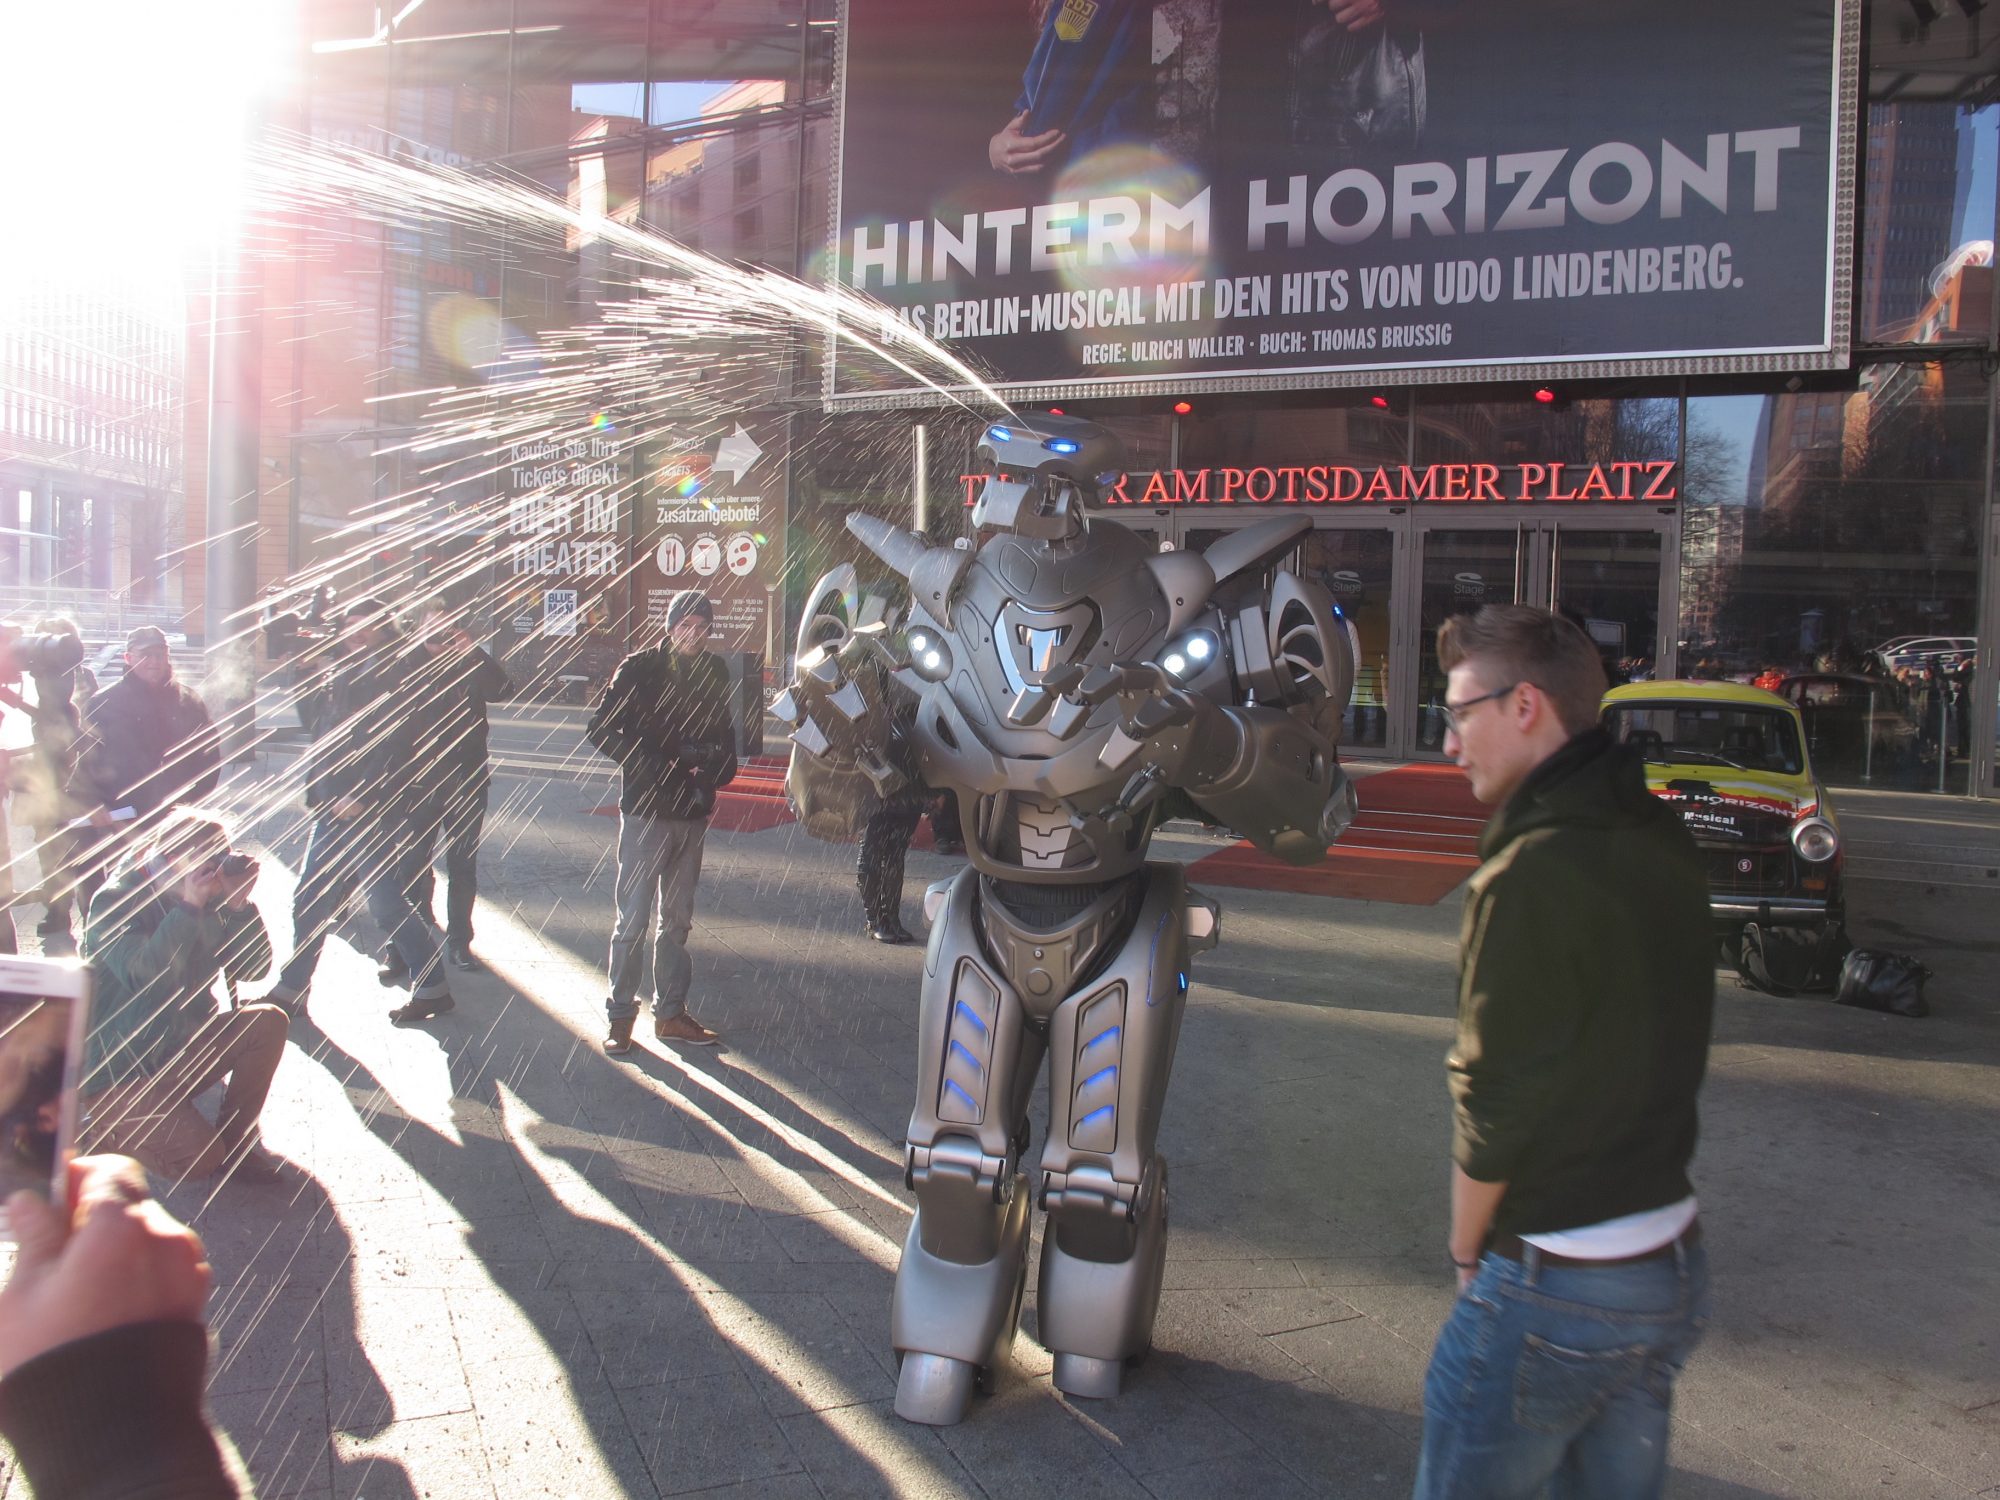 Titan the Robot squirting the audience during a show in Berlin, Germany. 